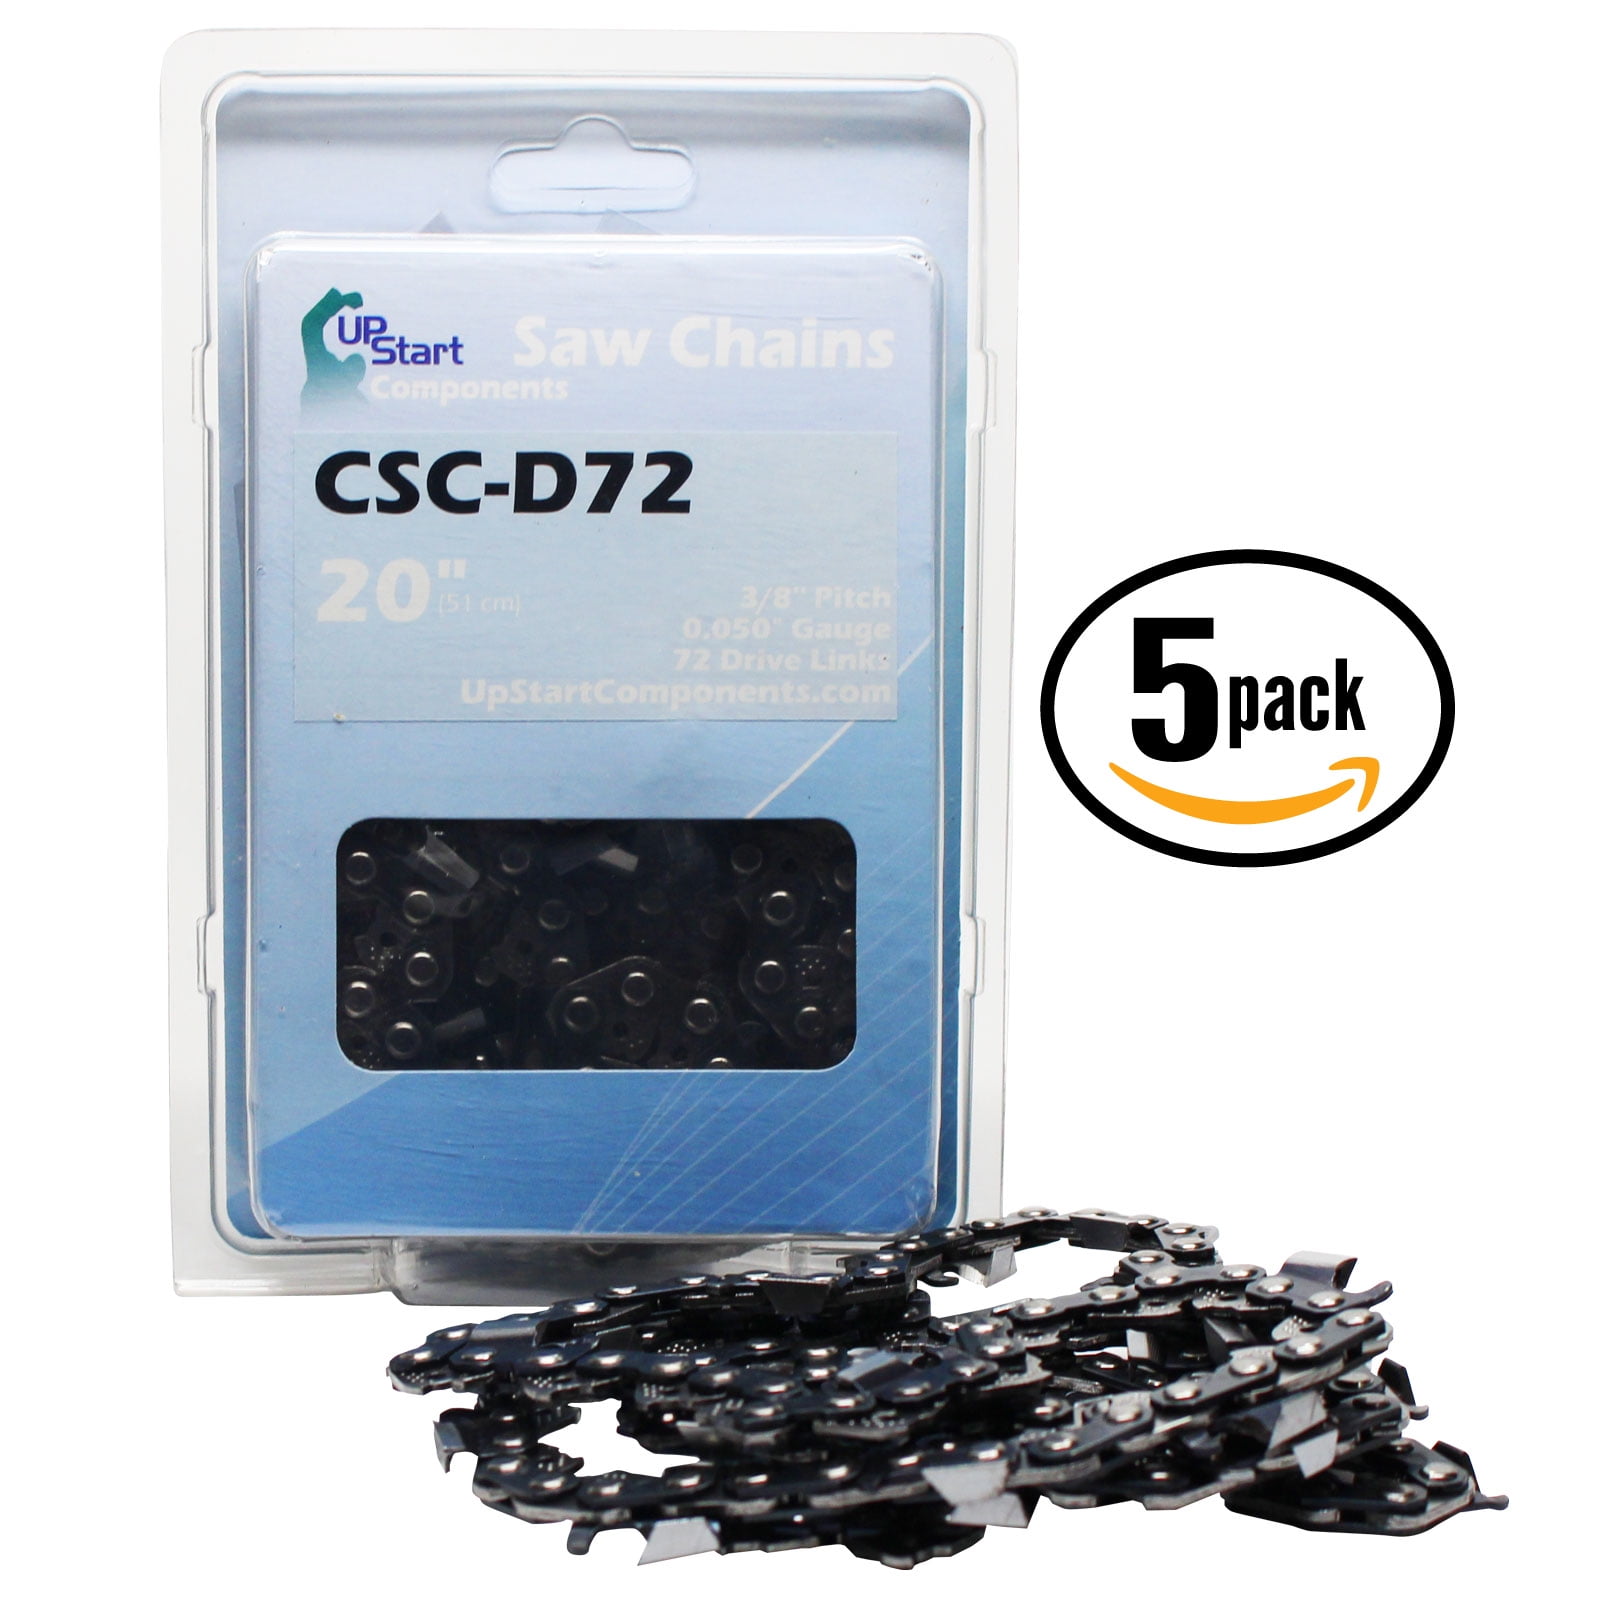 5 Pack 20 Full Chisel Saw Chain For Husqvarna 562 Xp Chainsaws 20